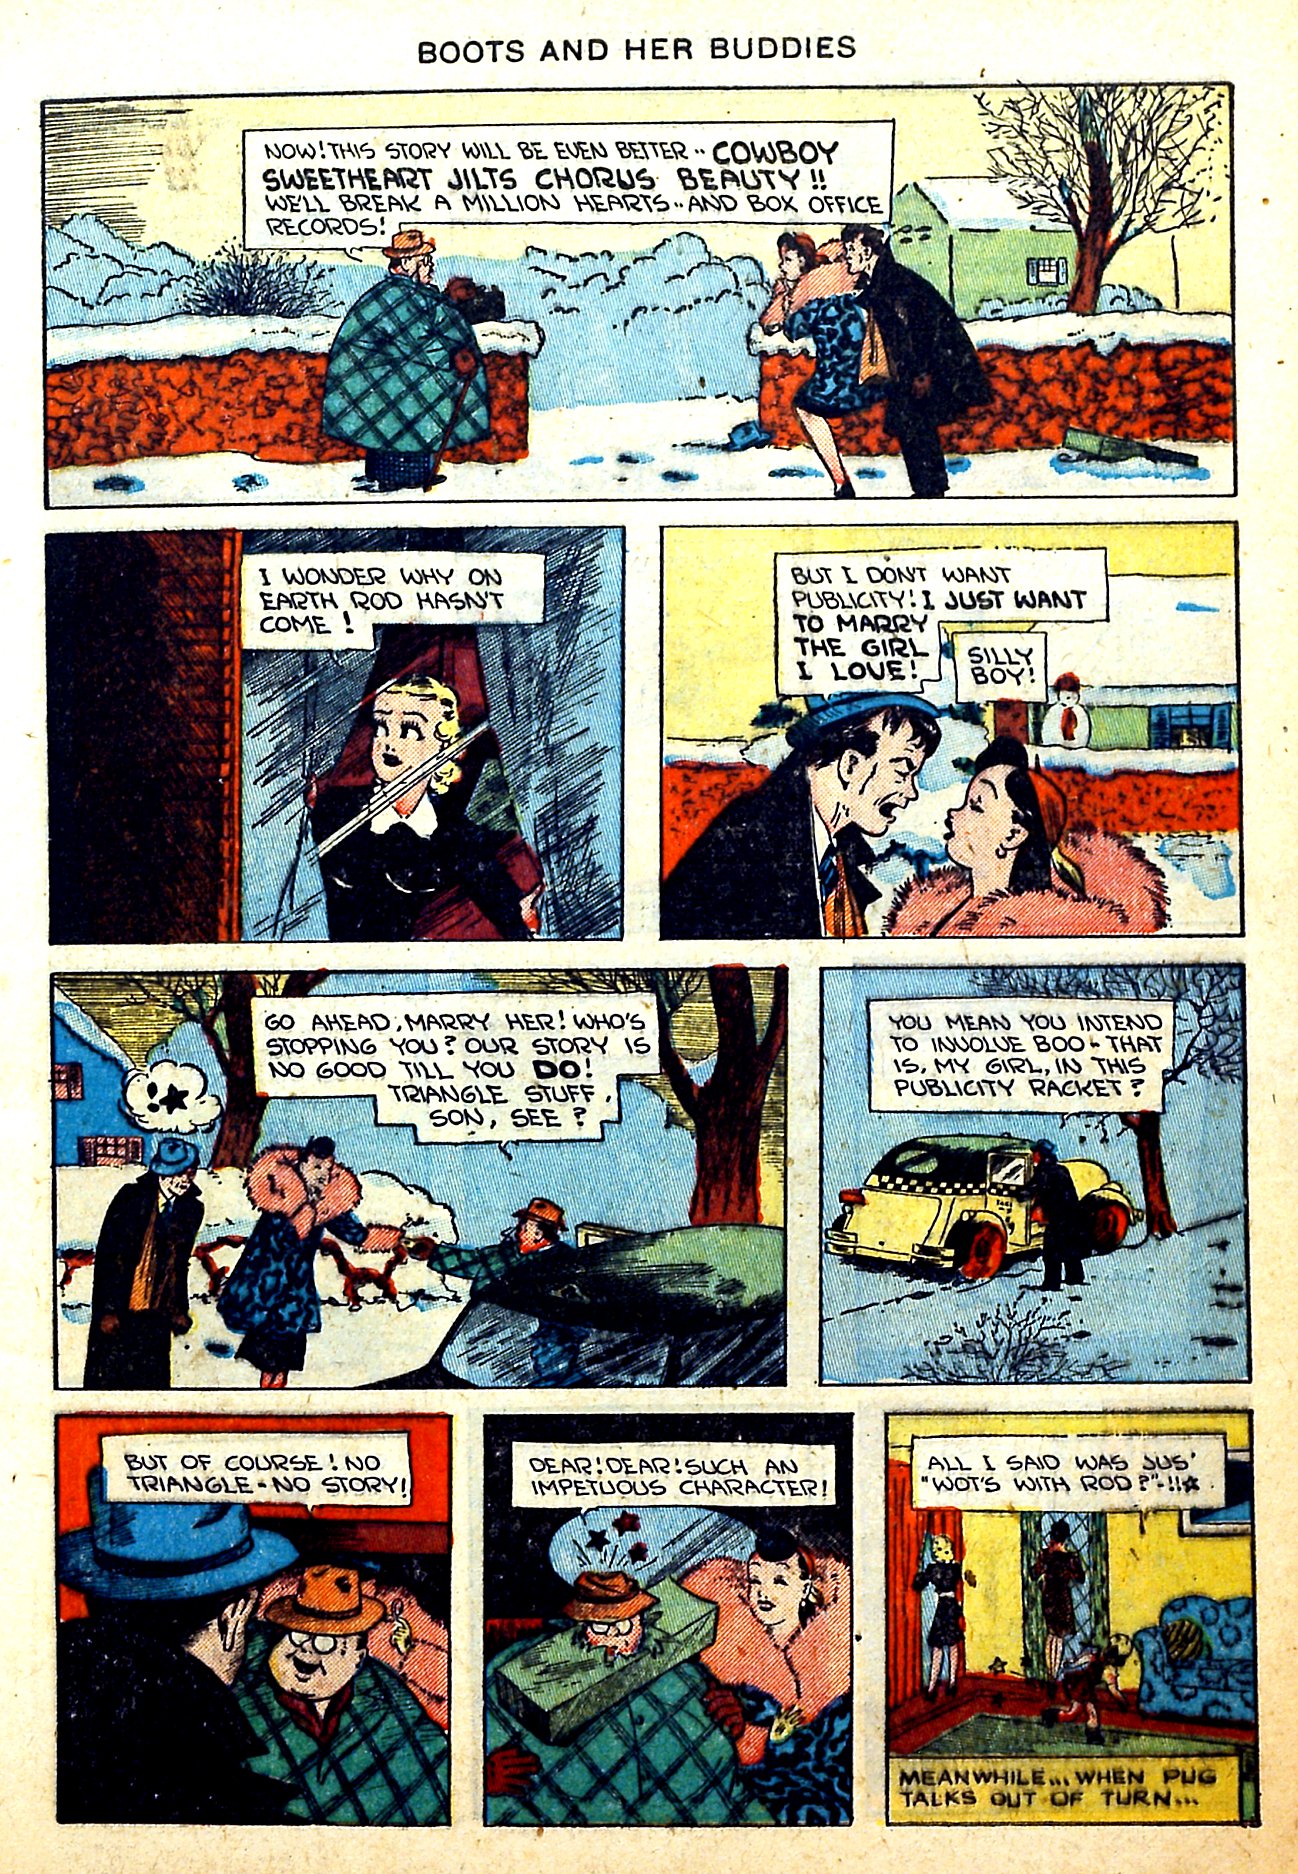 Read online Boots and Her Buddies (1948) comic -  Issue #8 - 9